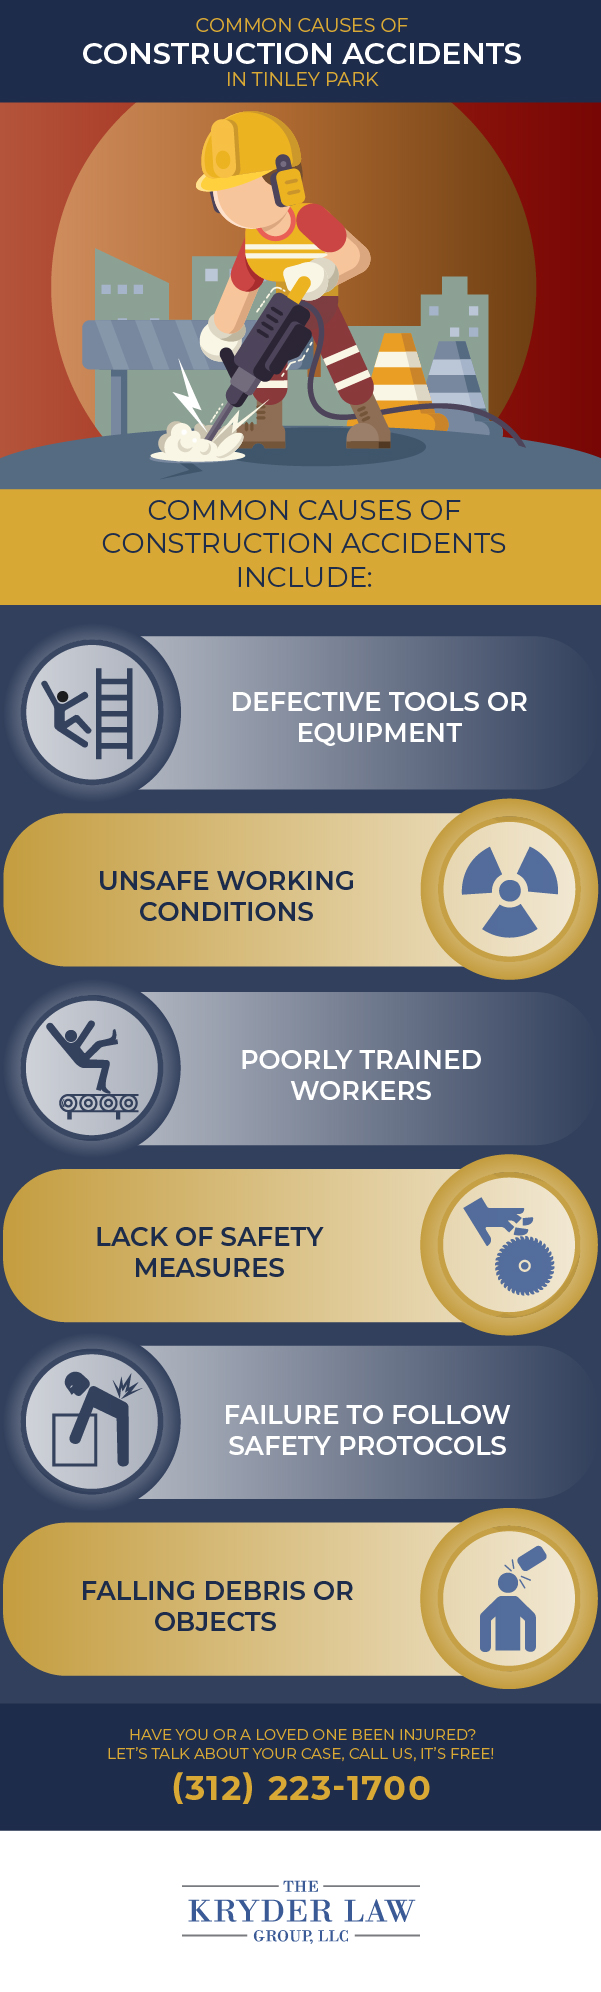 Common Causes of Construction Accidents in Tinley Park